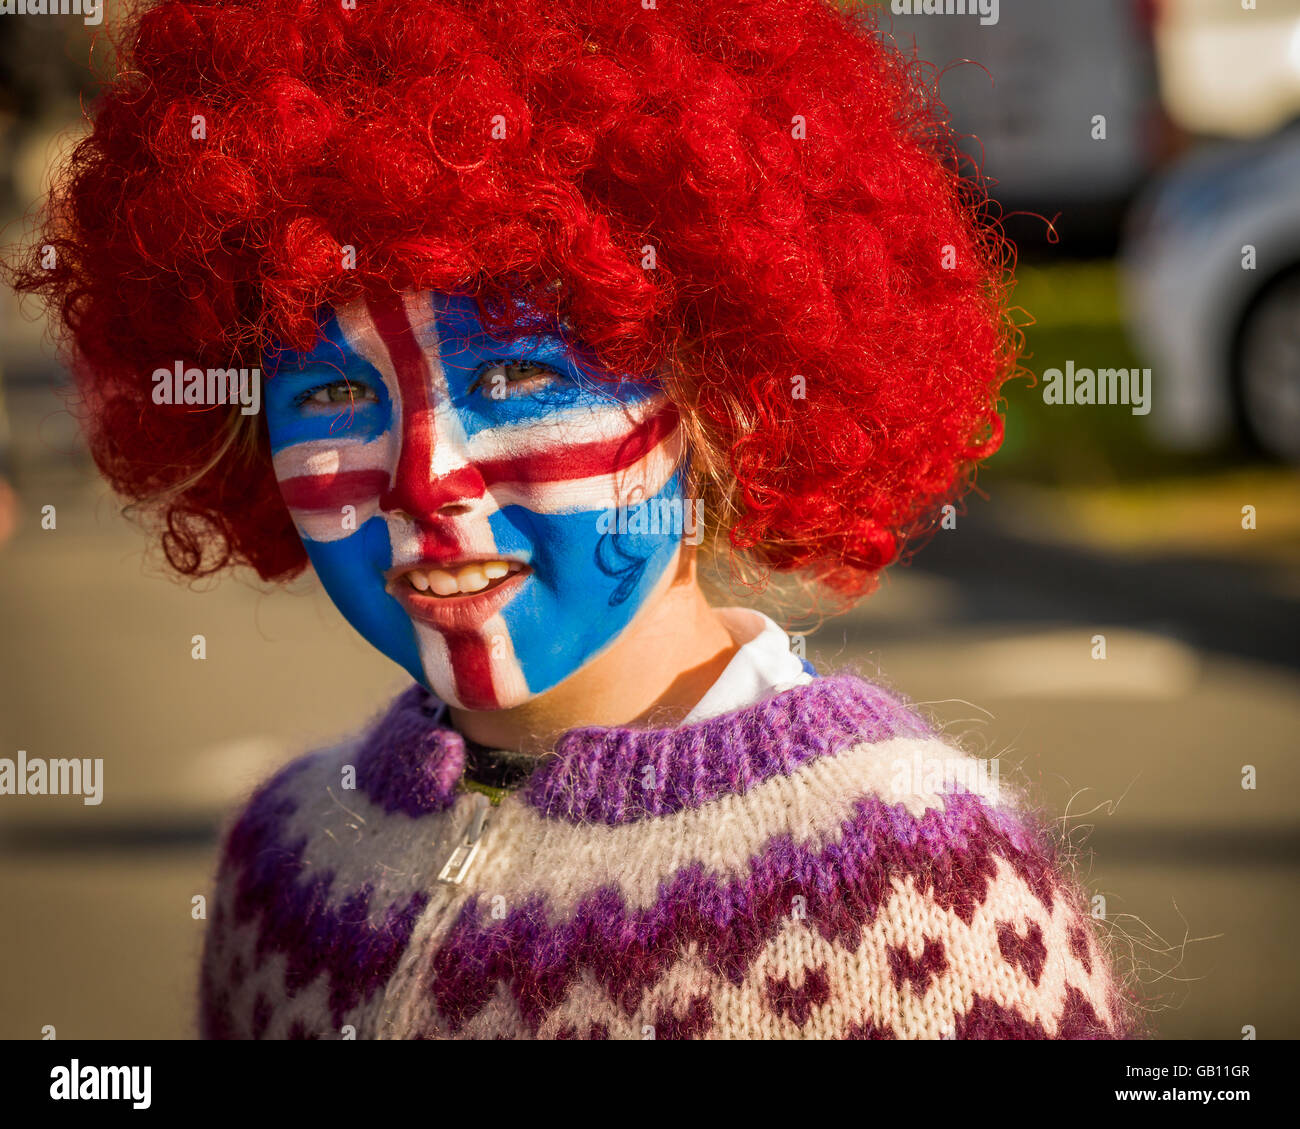 Girl with painted face, supporting Iceland in the UEFA Euro 2016 football tournament, Reykjavik, Iceland. Stock Photo